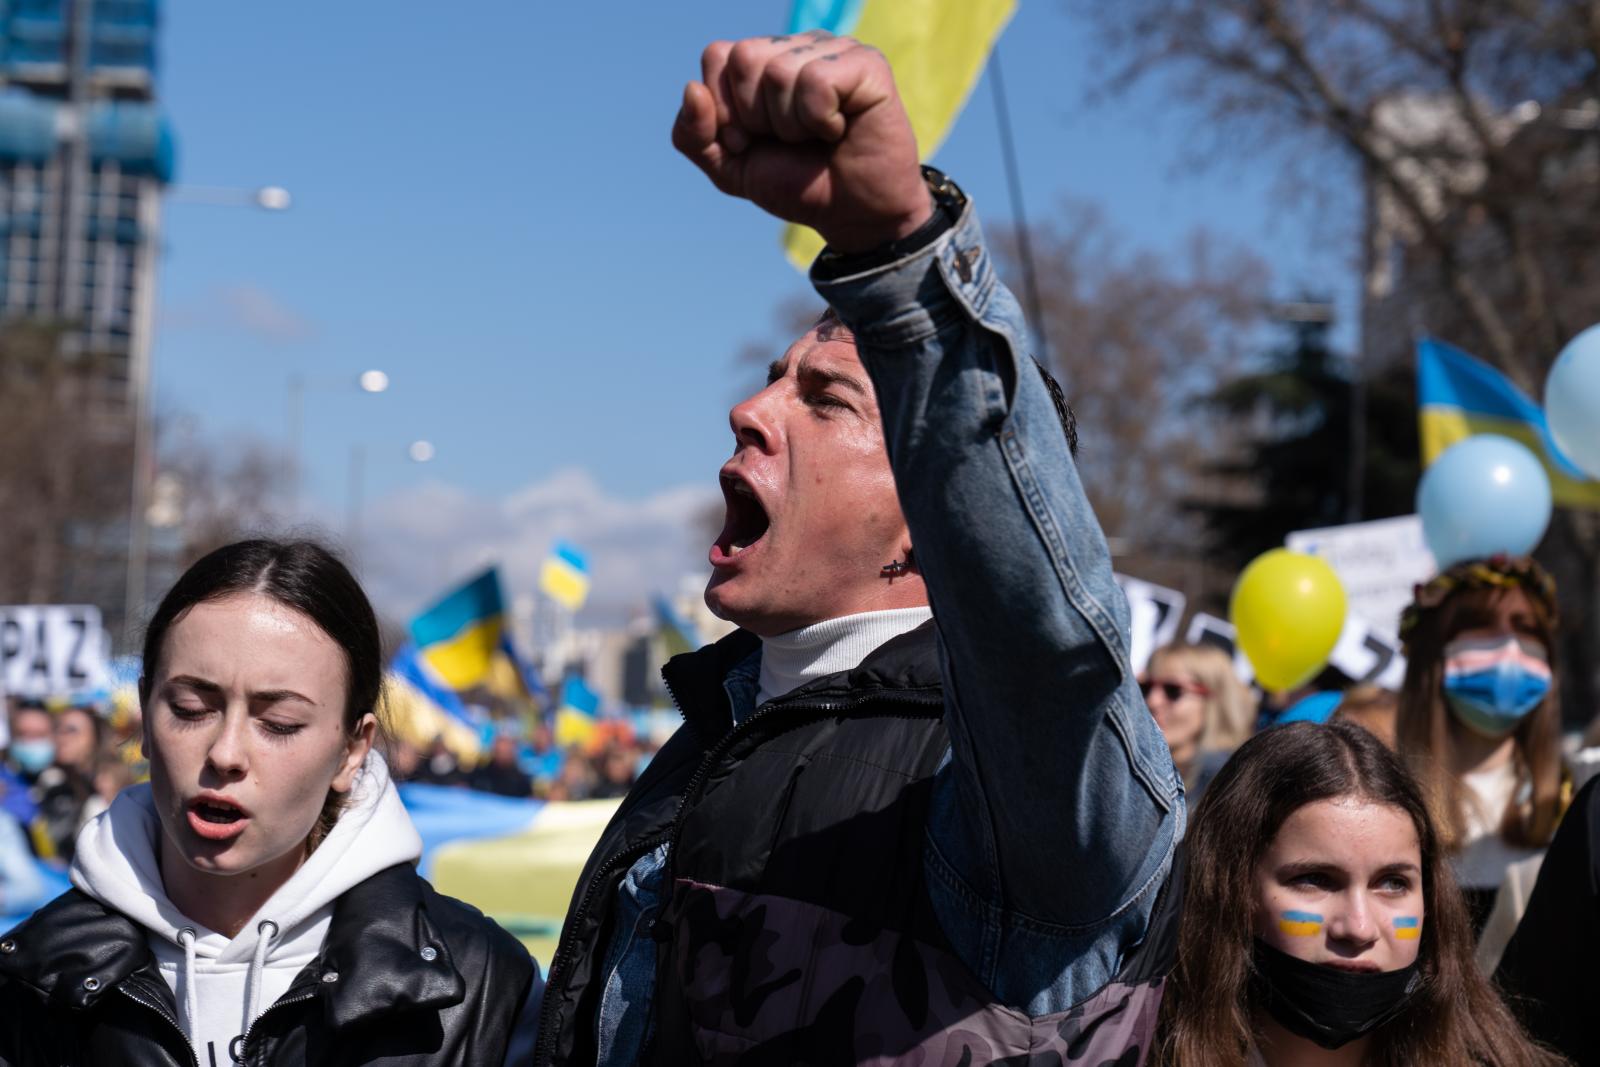 A man shouting slogans during t...he Russian invasion of Ukraine.